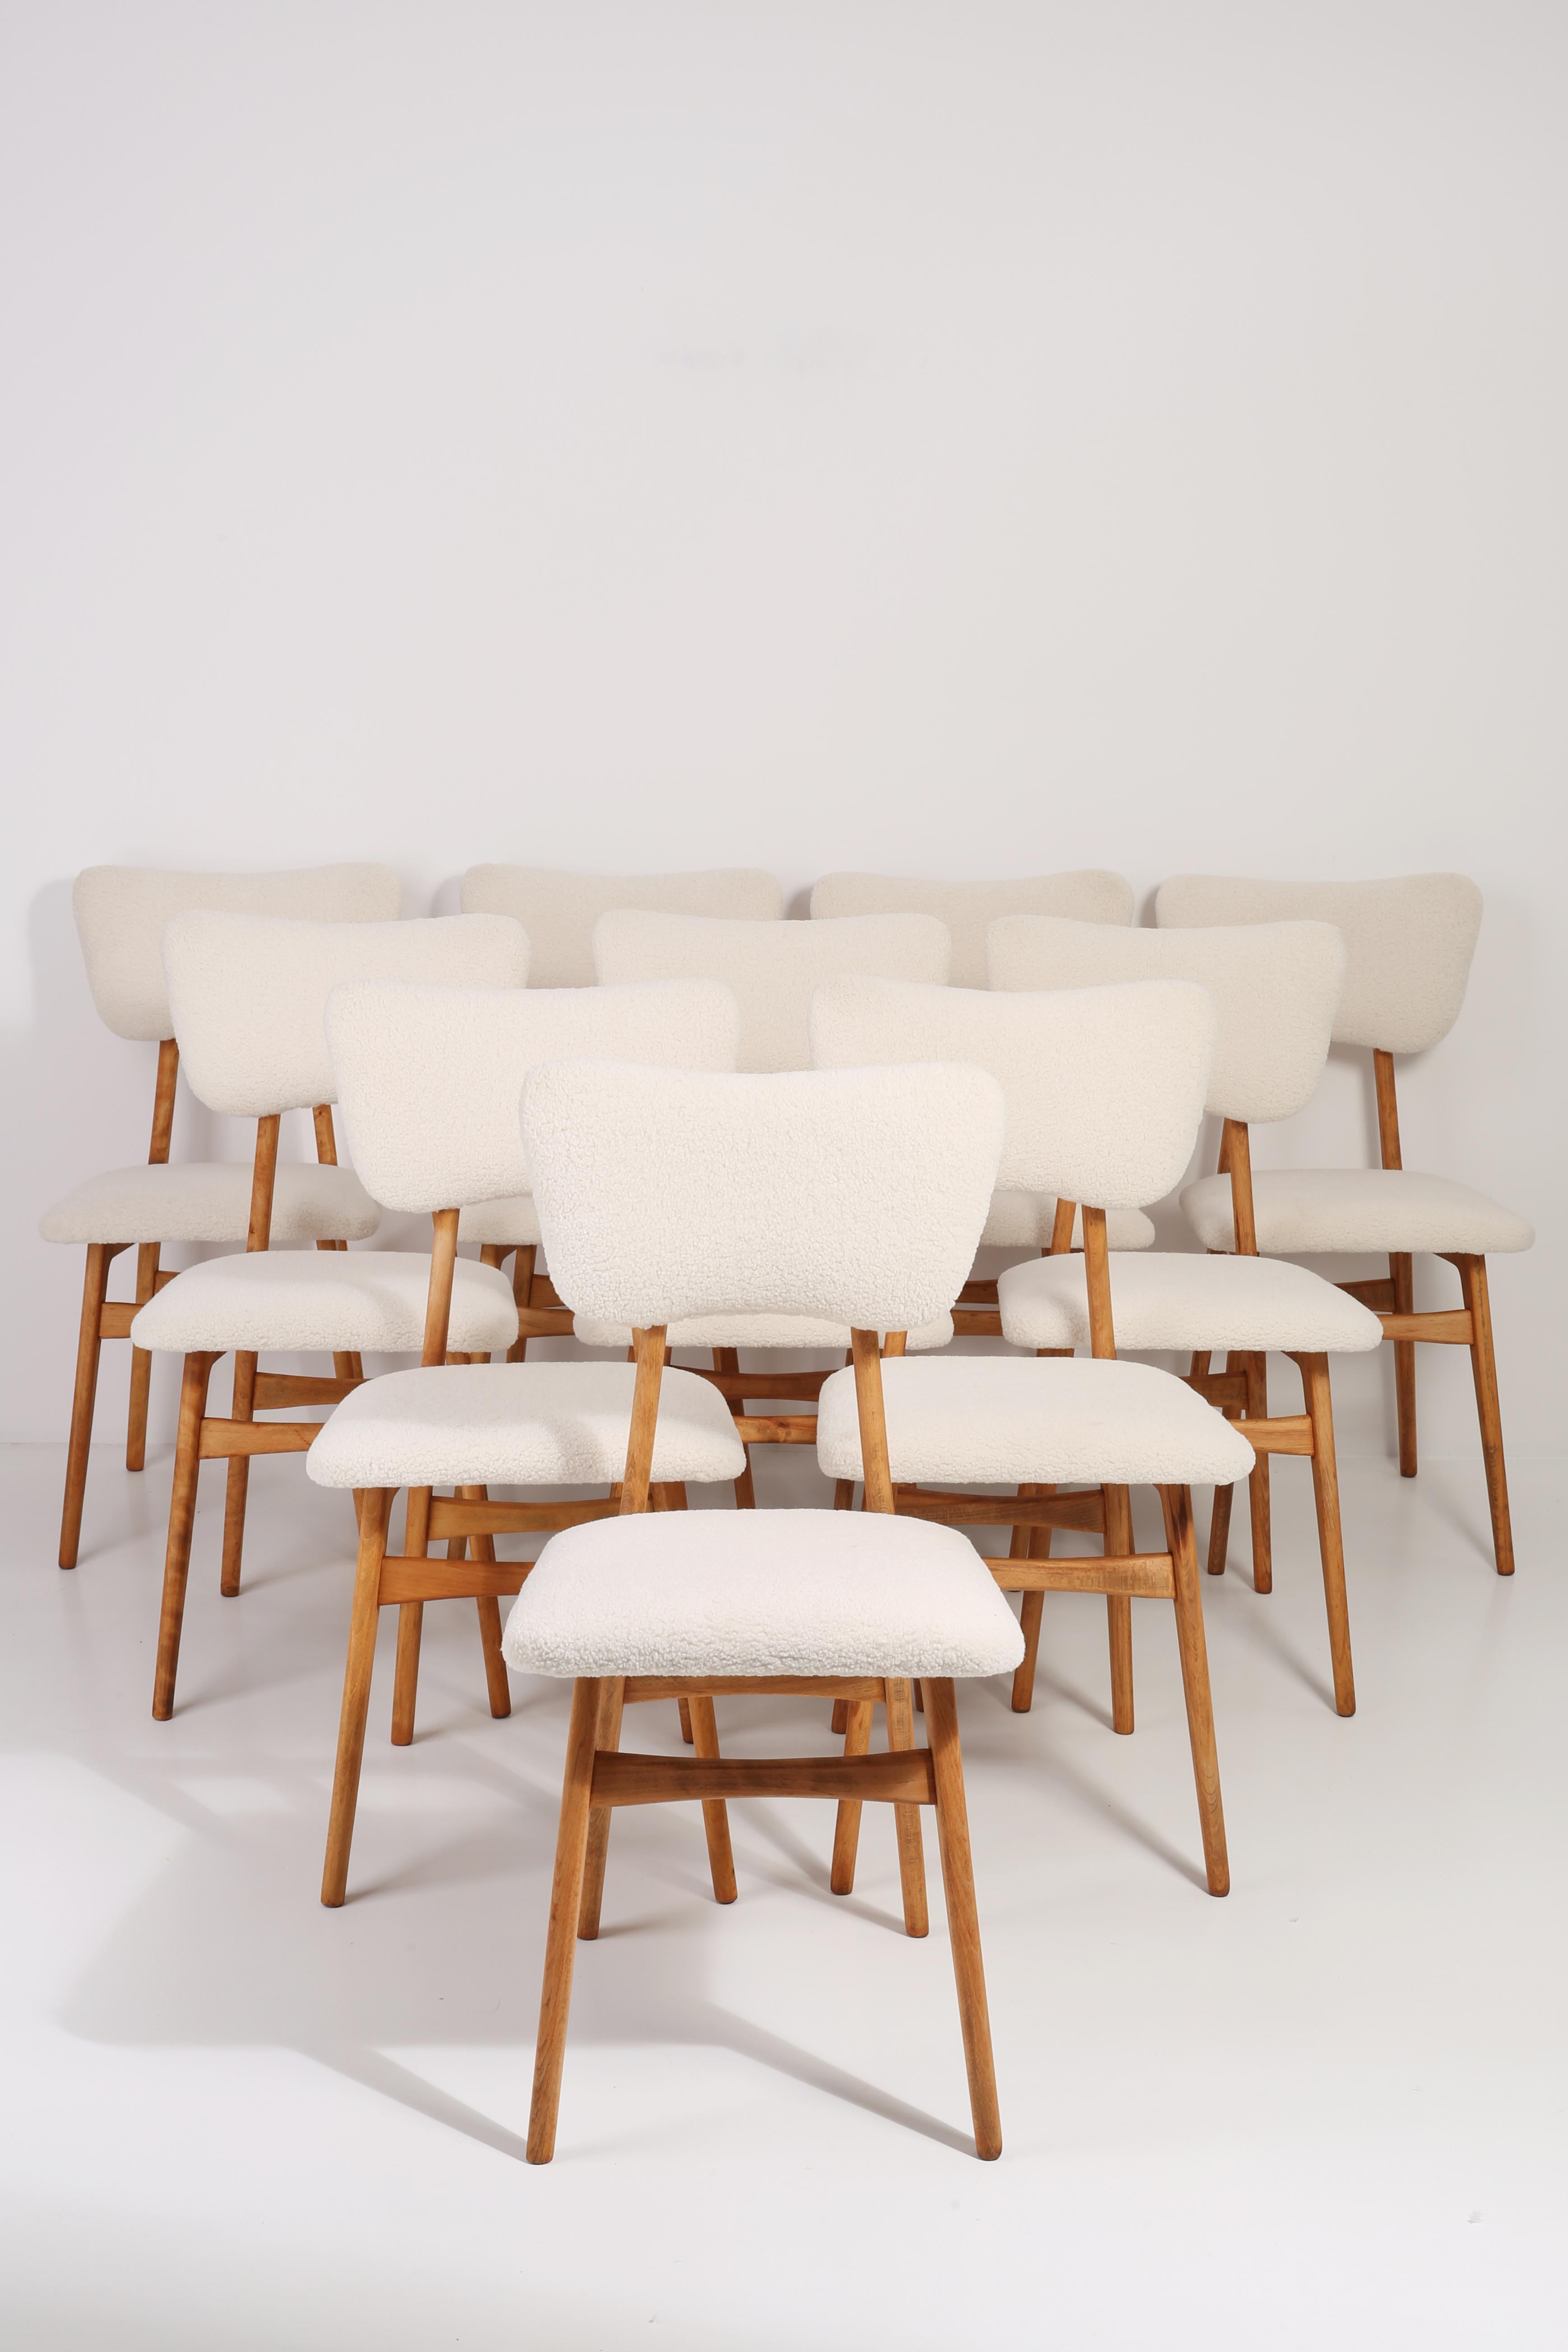 Chairs designed by Prof. Rajmund Halas. Made of beechwood. Chair is after a complete upholstery renovation; the woodwork has been refreshed. Seat and back is dressed in crème, durable and pleasant to the touch bouclé fabric. Chair is stabile and